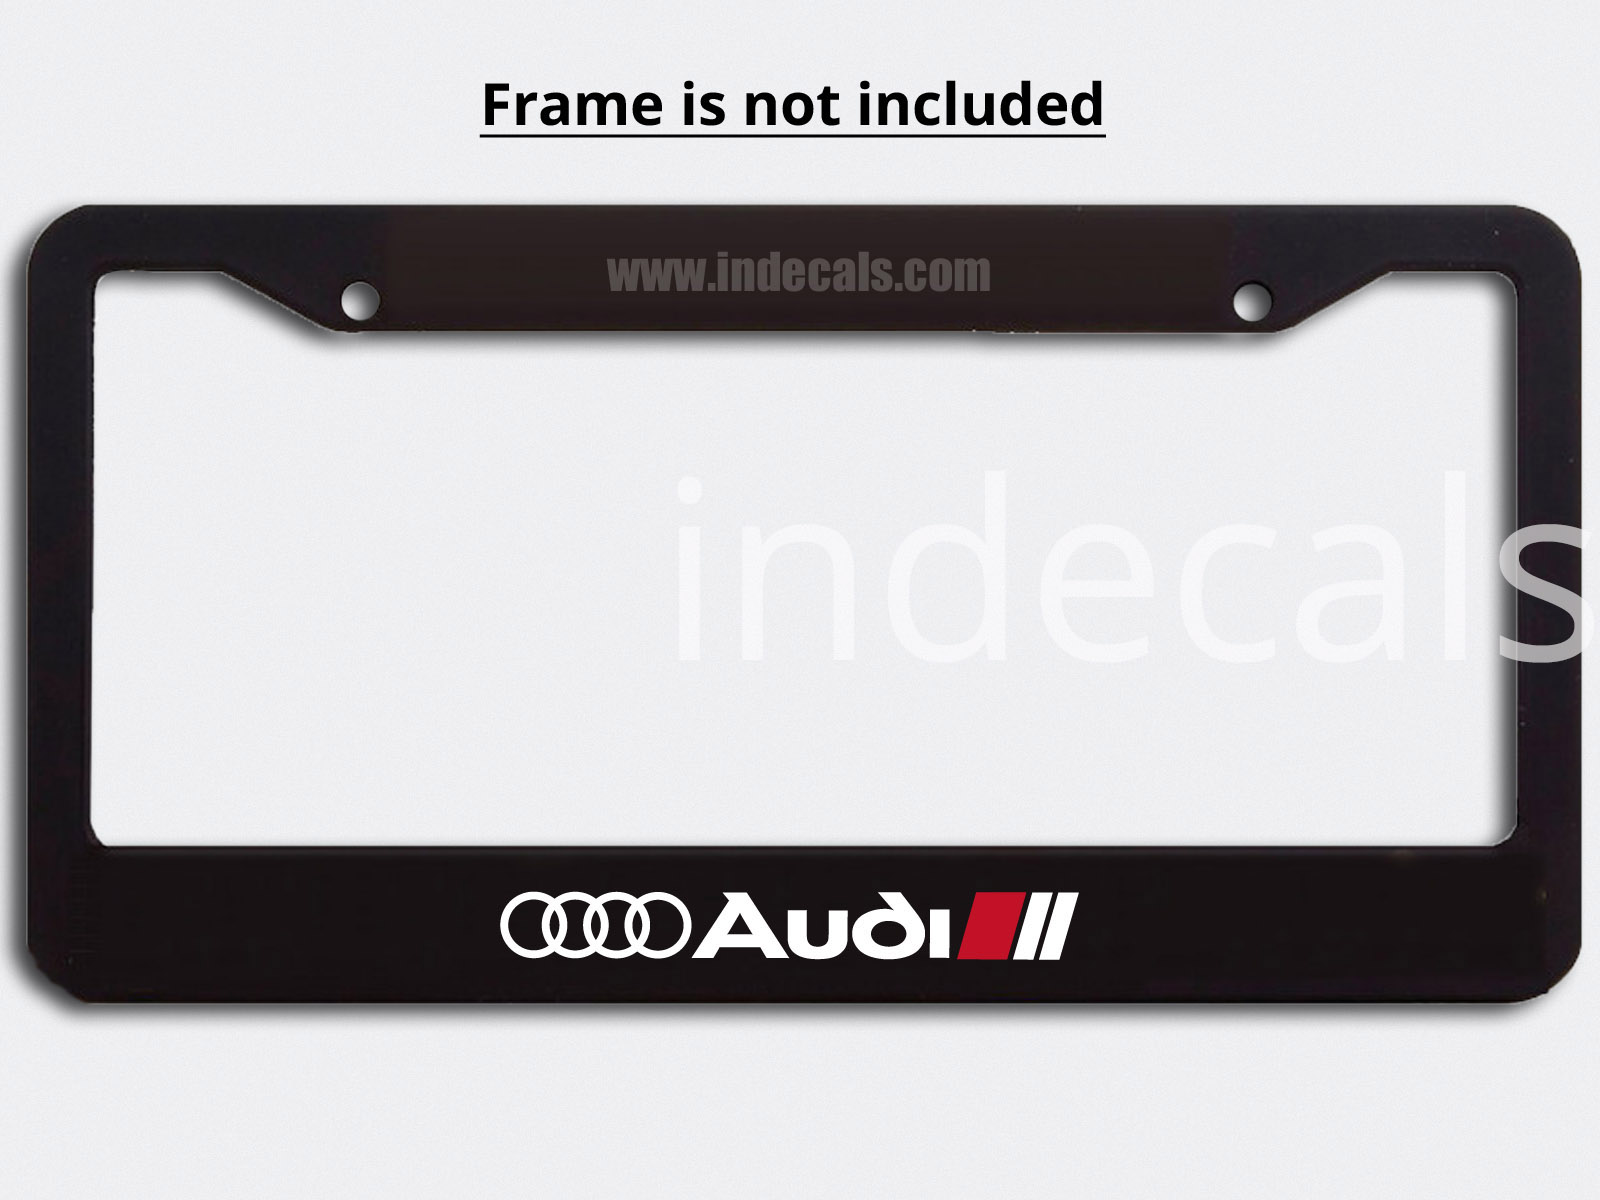 3 x Audi Stickers for Plate Frame - White